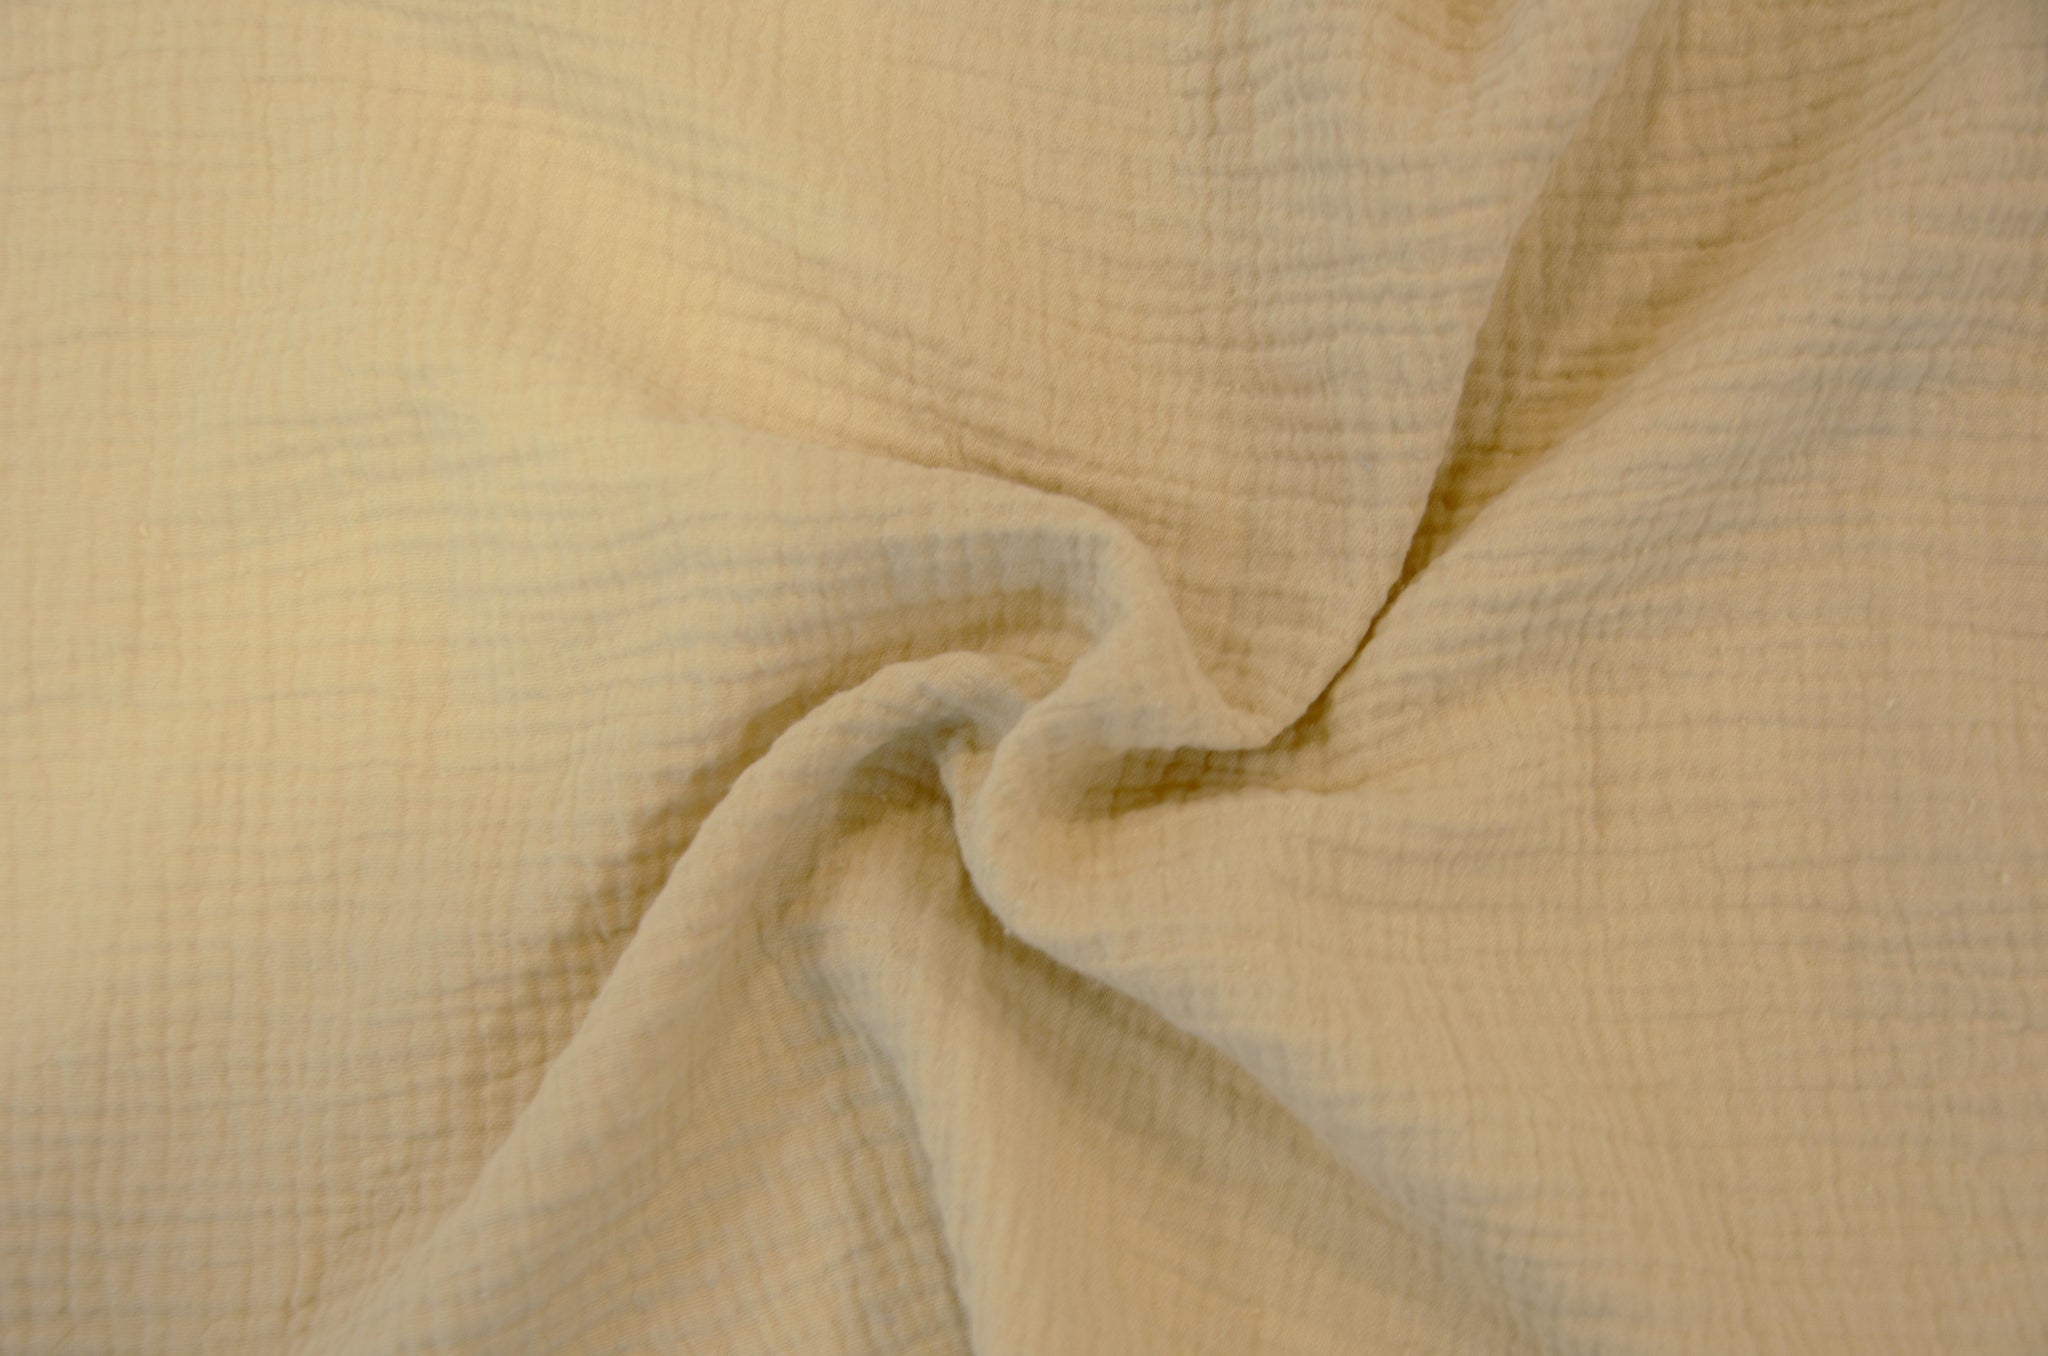 Double Layer Cotton Gauze Fabric, Soft Double Layer Muslin